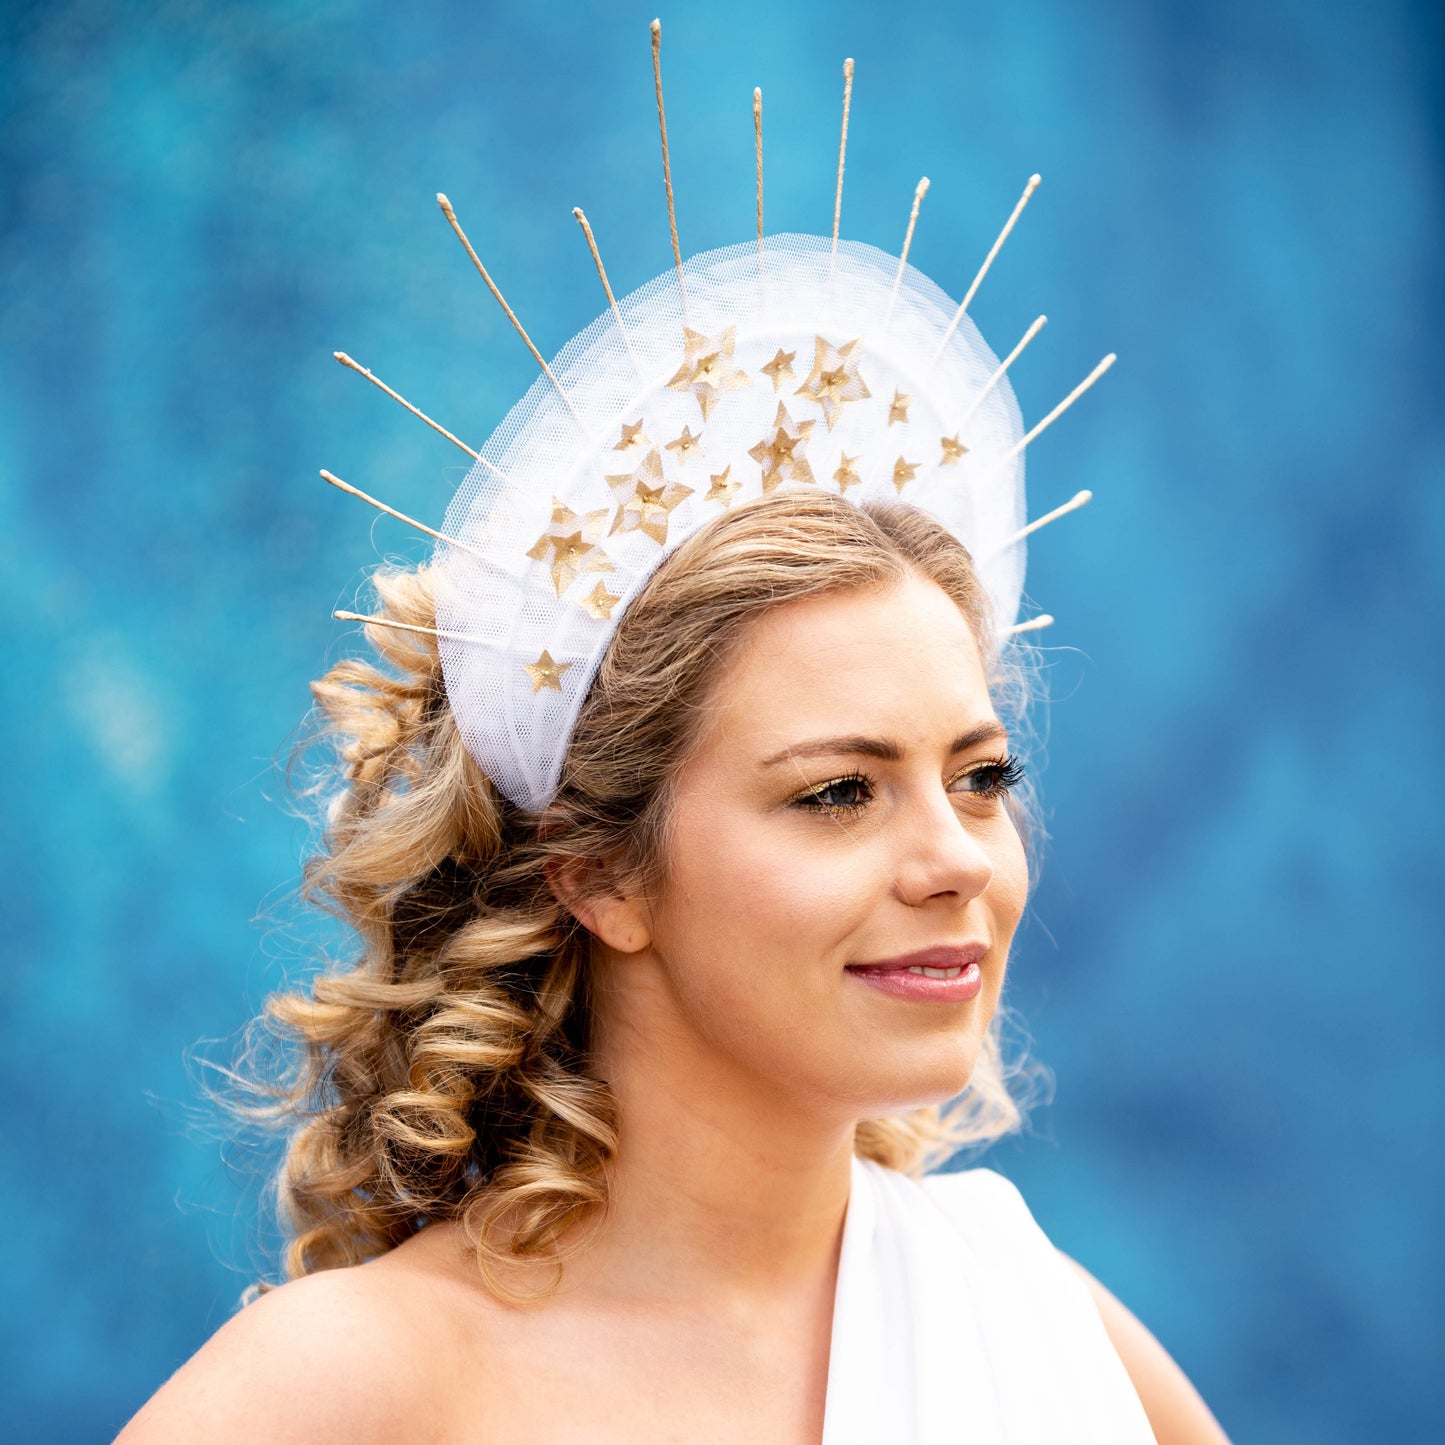 Asteria white and gold halo headpiece with star features